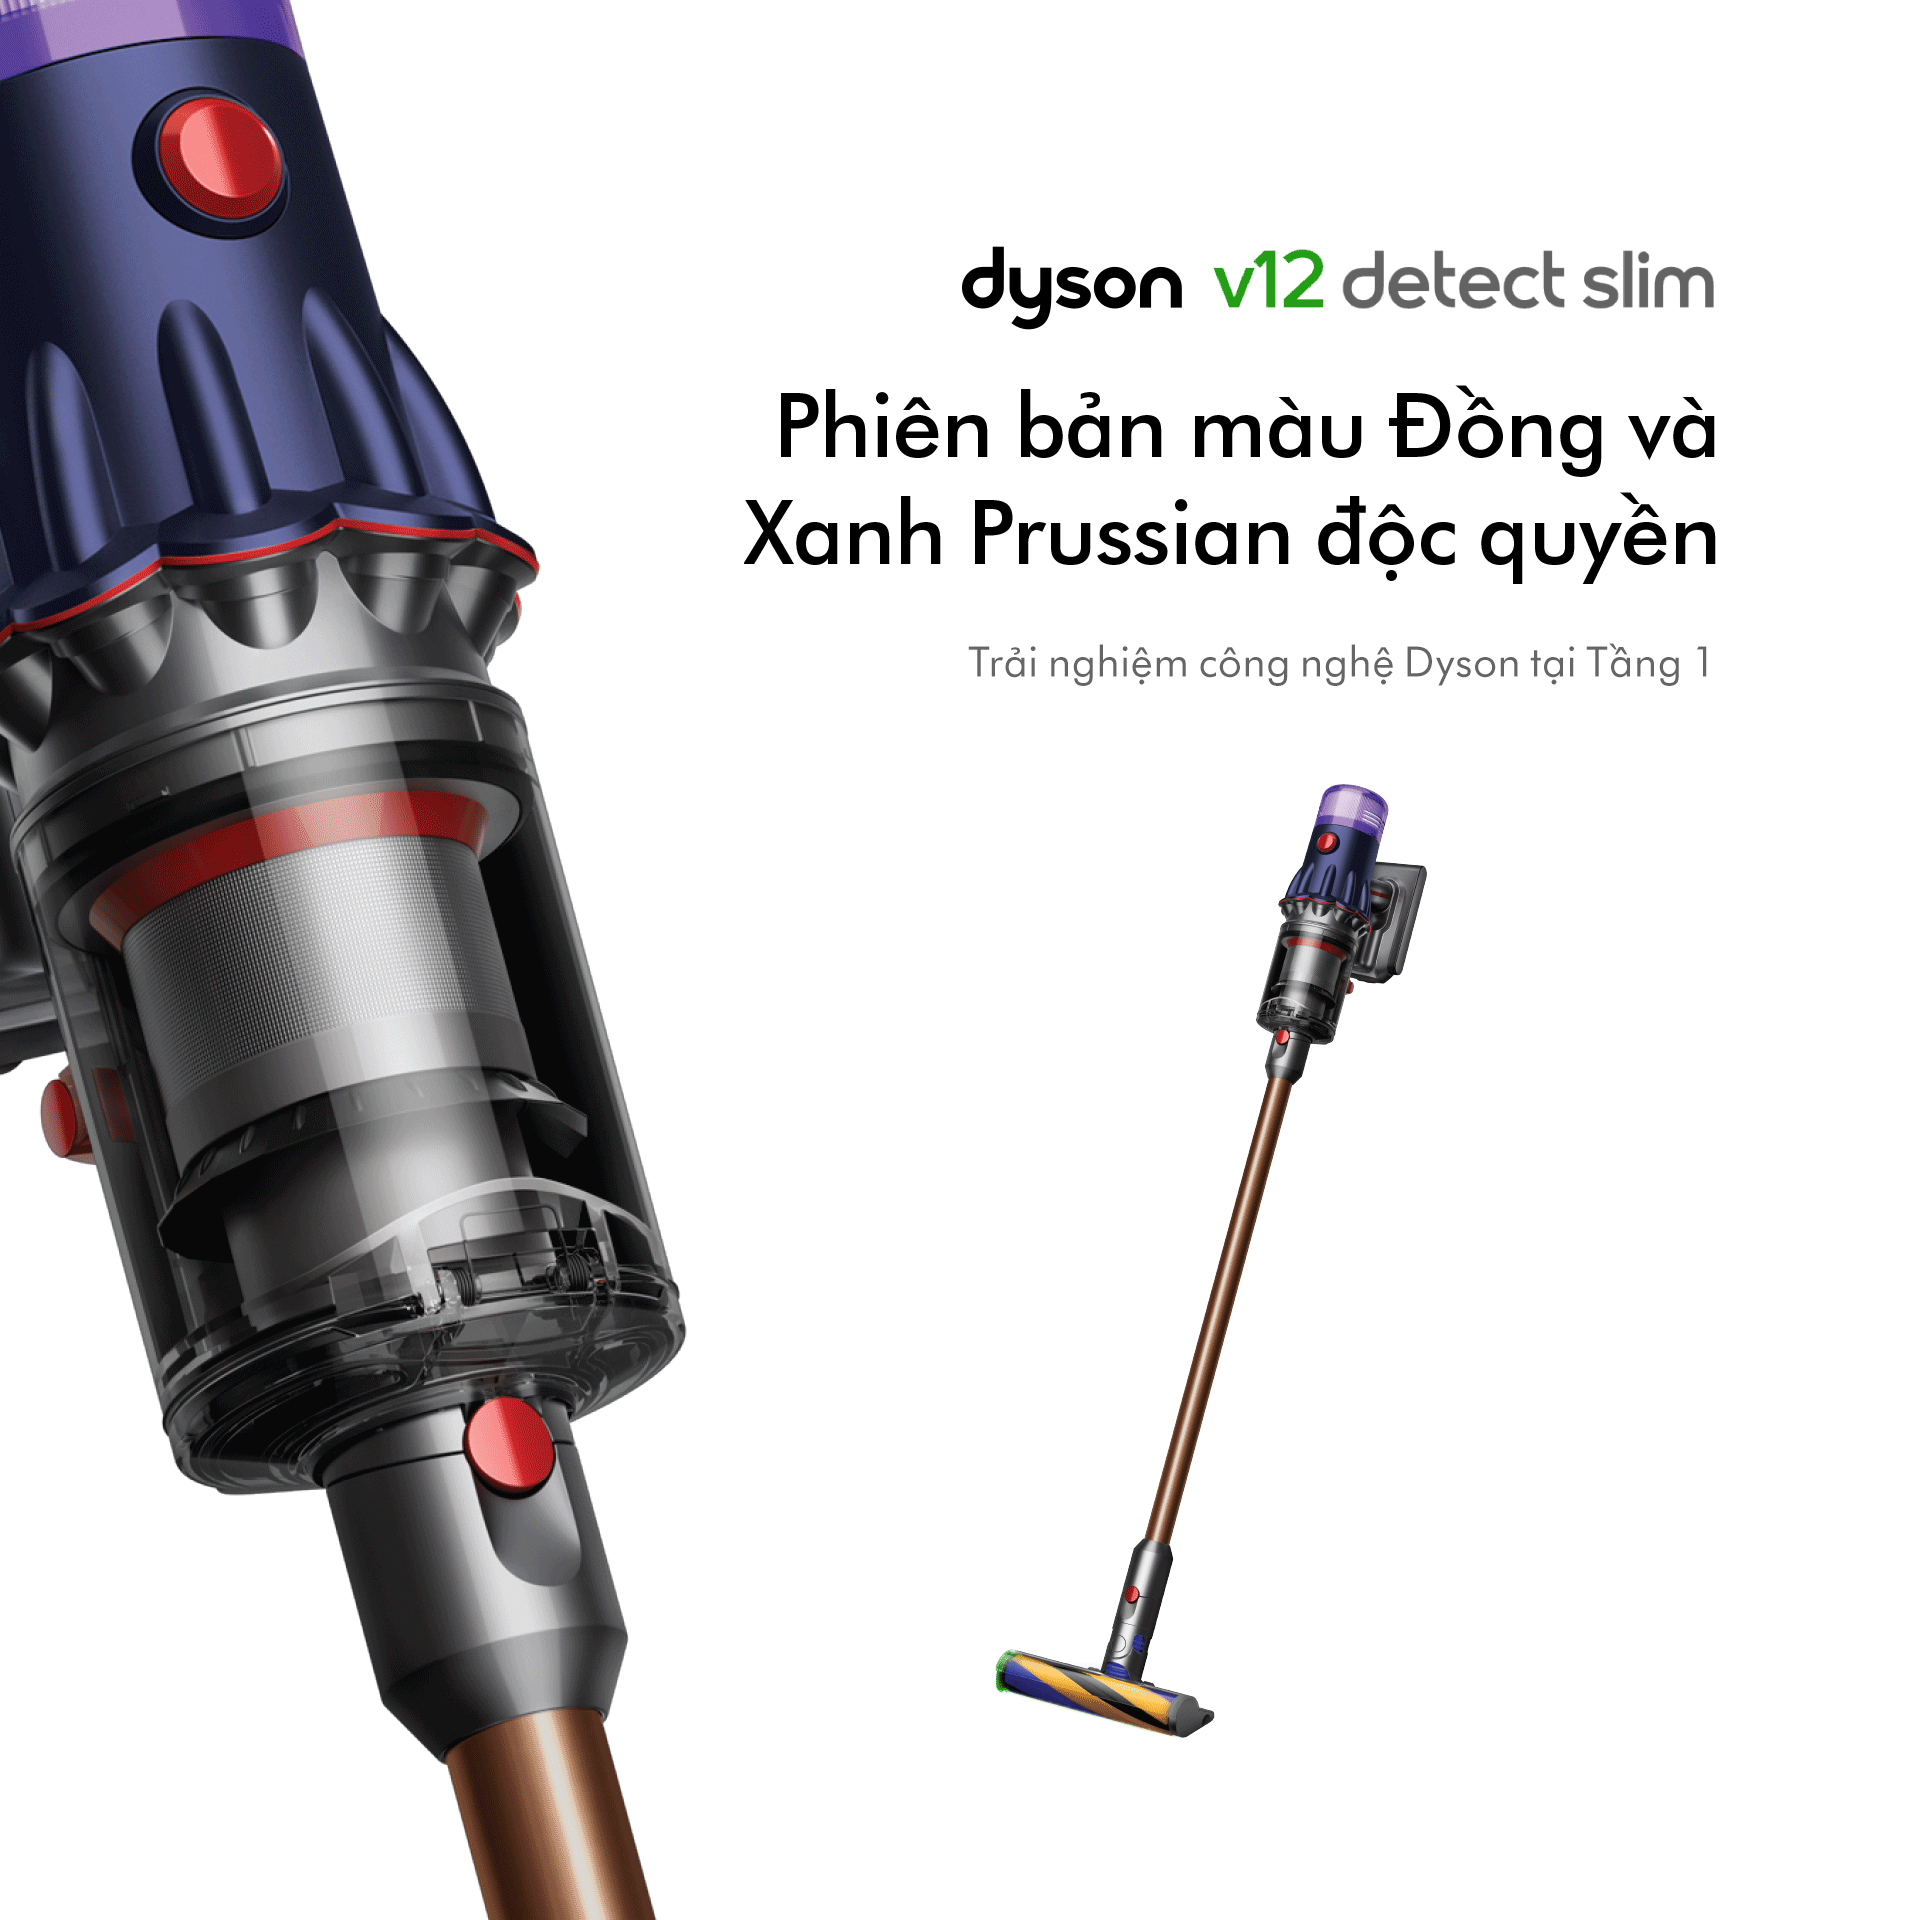 DYSON V12 DETECT SLIM - NOW IN SPECIAL EDITION PRUSSIAN BLUE & COOPER🎉🎉🎉